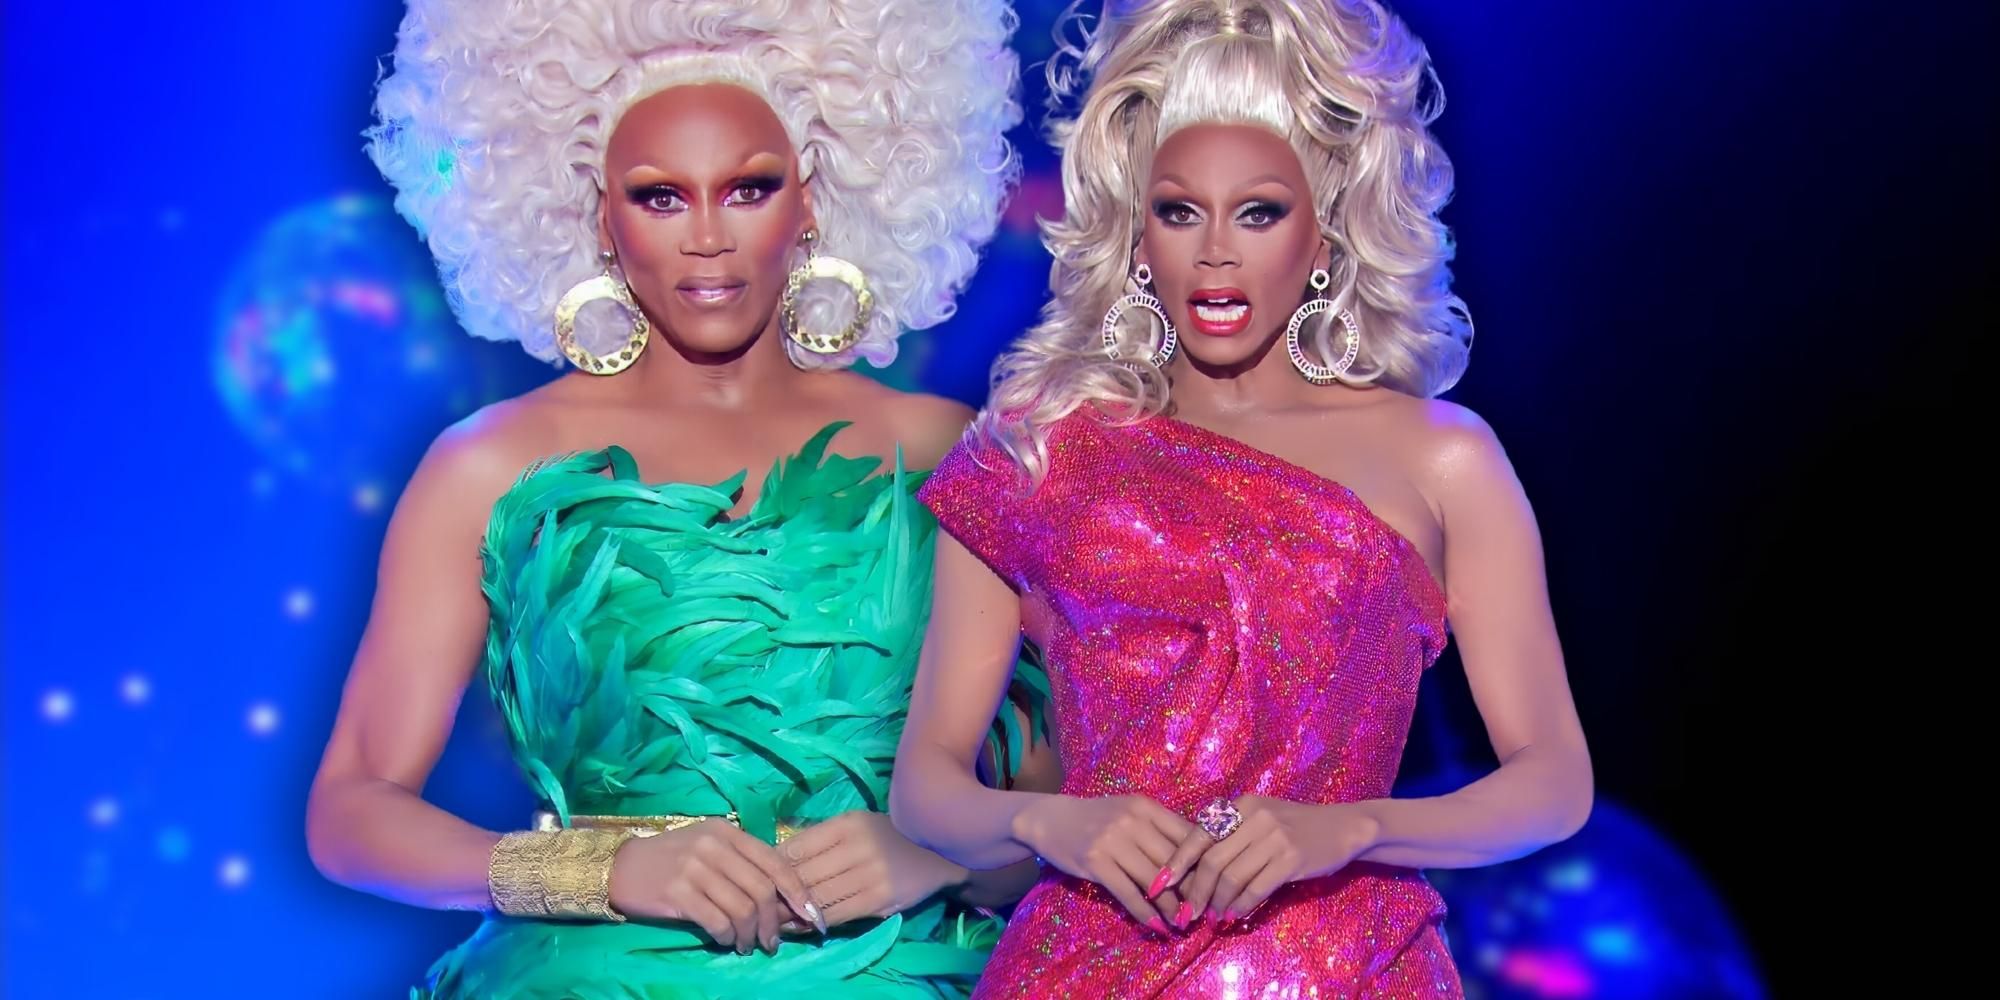 RuPaul hosting Rupaul's drag race in two different outfits, first one is green and second one is sparkly pink